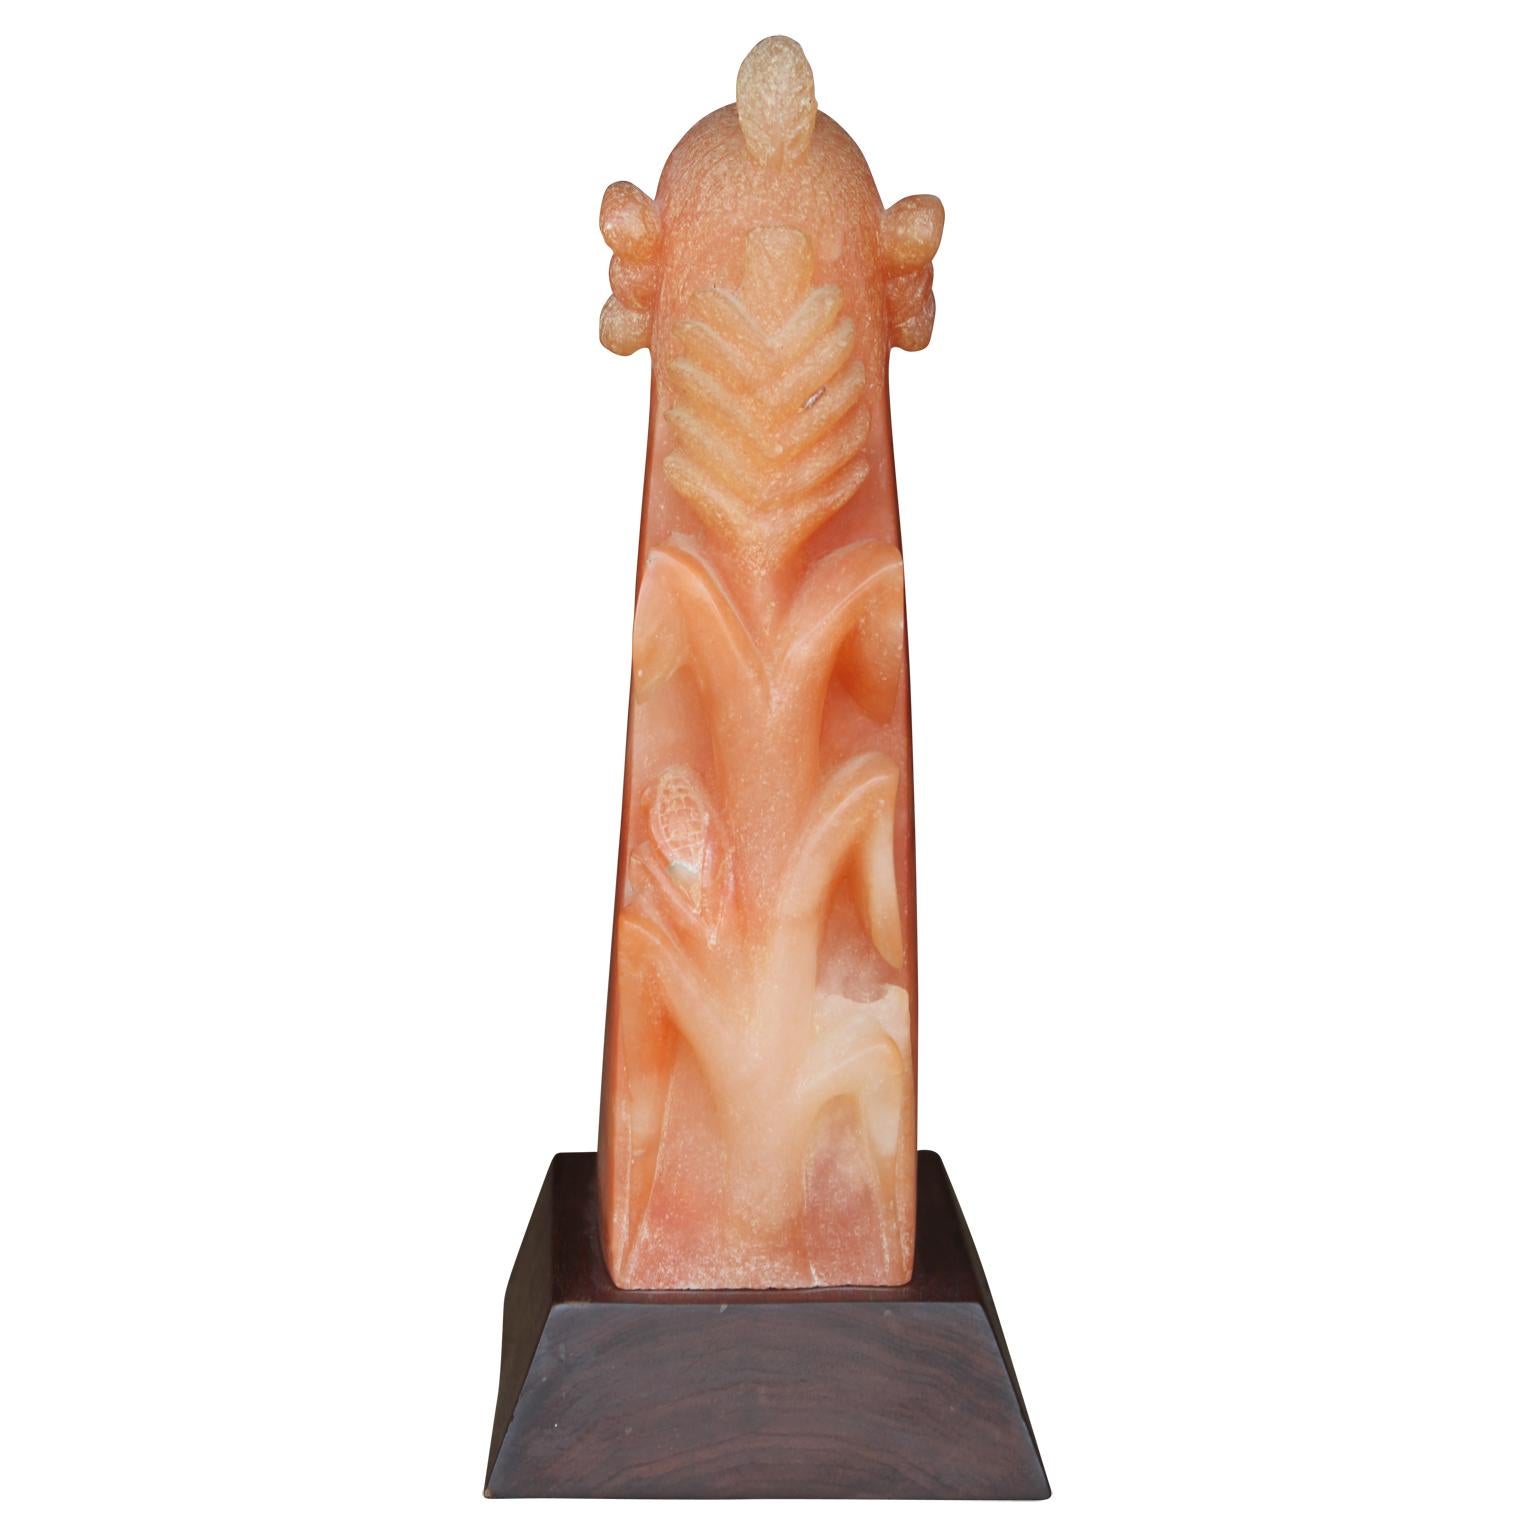 Native New Mexico Pink Alabaster Sculpture of a Corn Man - White Abstract Sculpture by Unknown